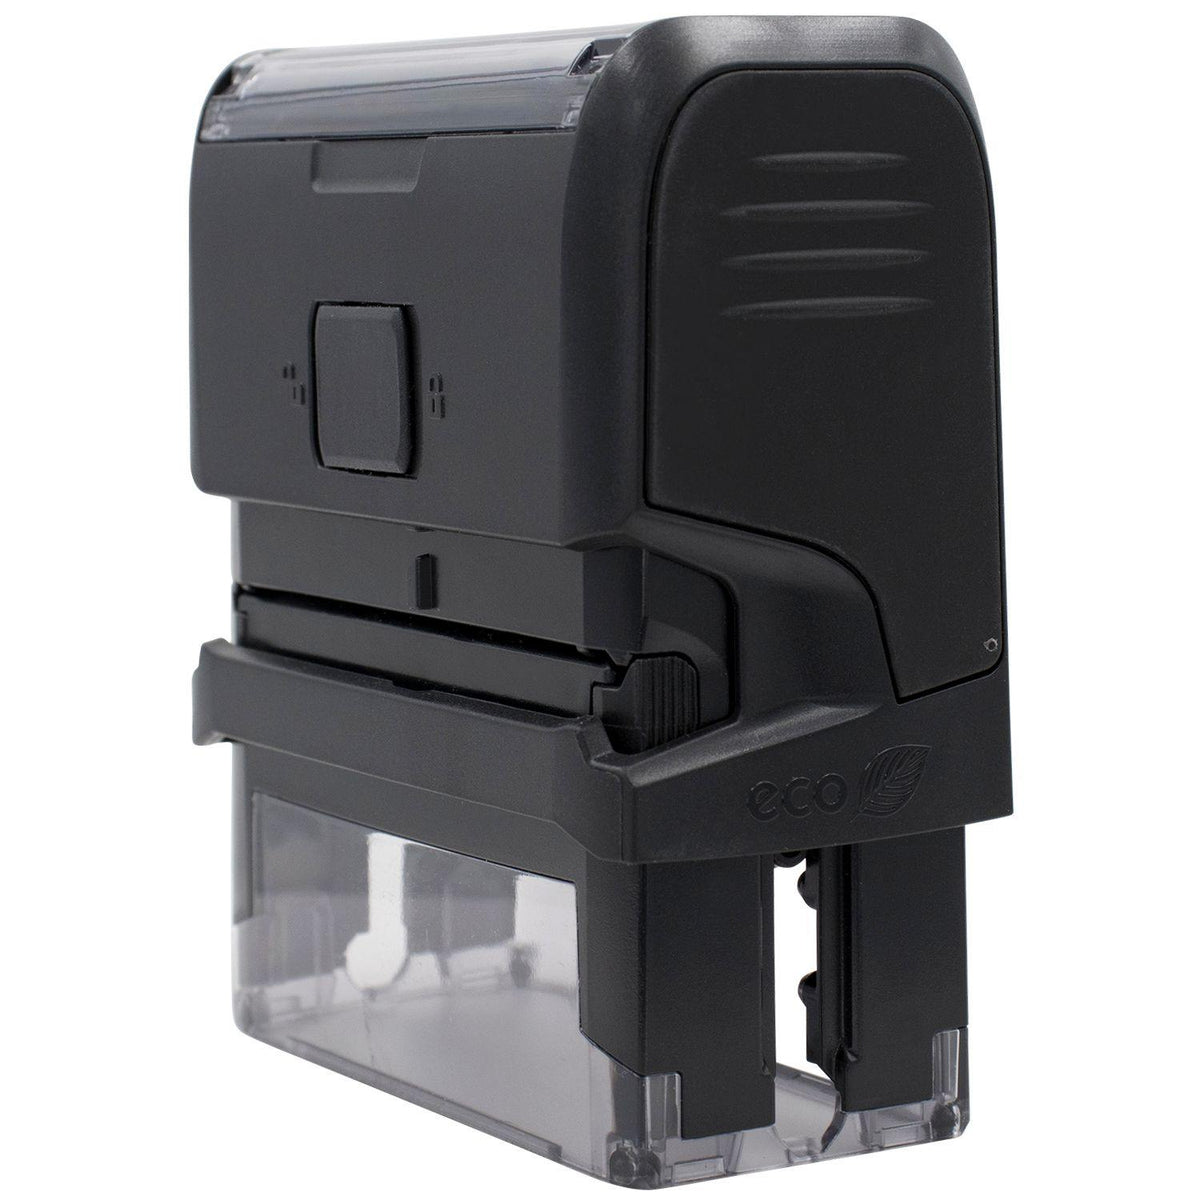 Self Inking Summer Term Recommended Stamp - Engineer Seal Stamps - Brand_Trodat, Impression Size_Small, Stamp Type_Self-Inking Stamp, Type of Use_Teacher